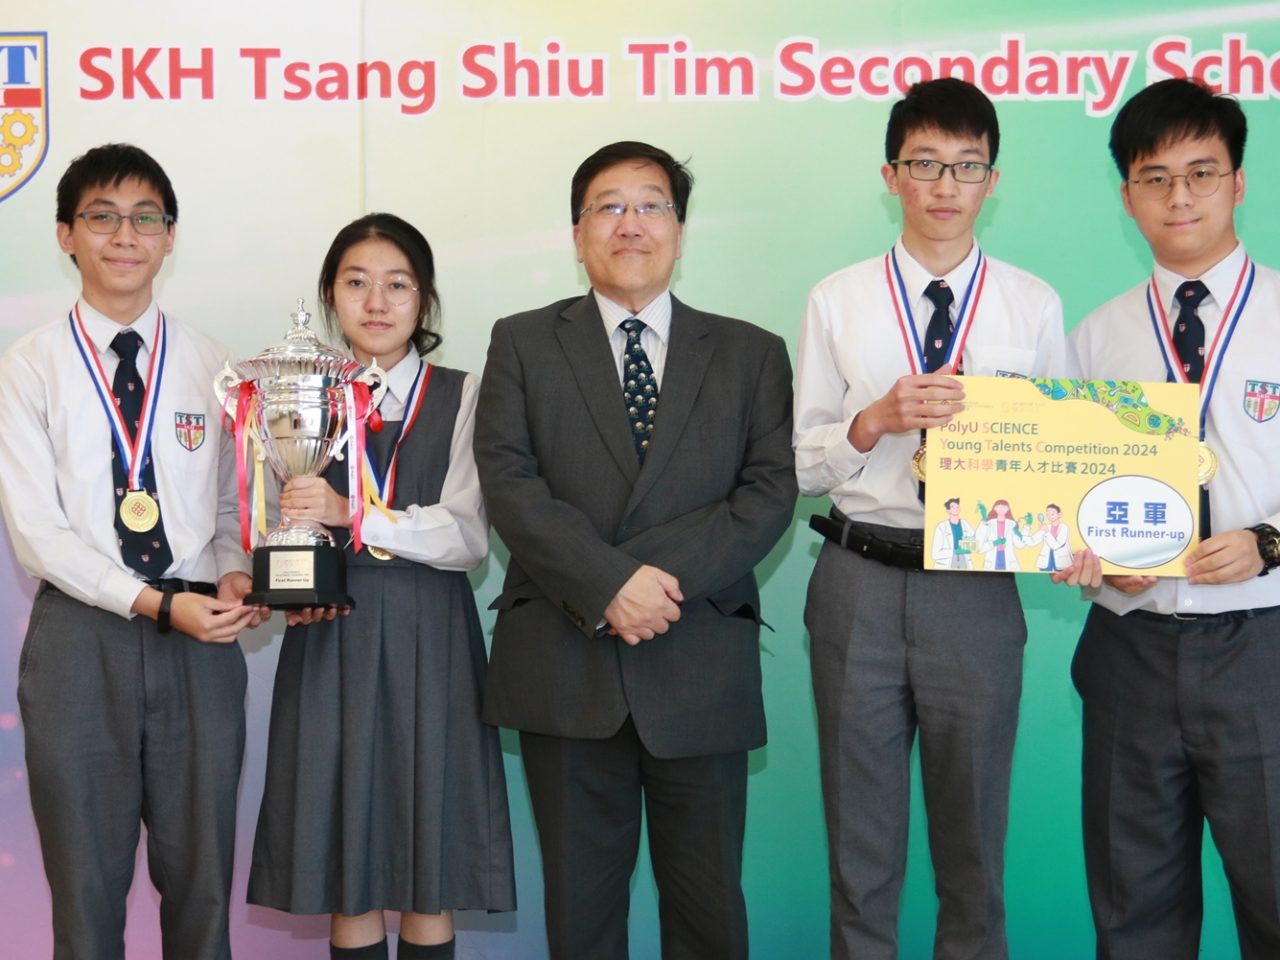 PolyU Science Young Talents Competition 2024